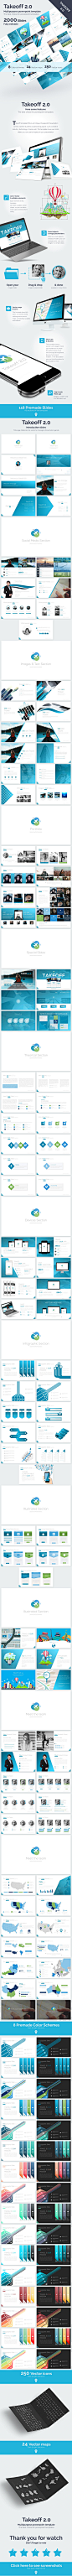 Takeoff Bundle 2 in 1 : Takeoff Bundle  – Powerpoint Templates


Takeoff 2.0
Dinasty


This presentation template is so versatile that it can be used in many different businesses.

Main features:


Business & Clean Style ...